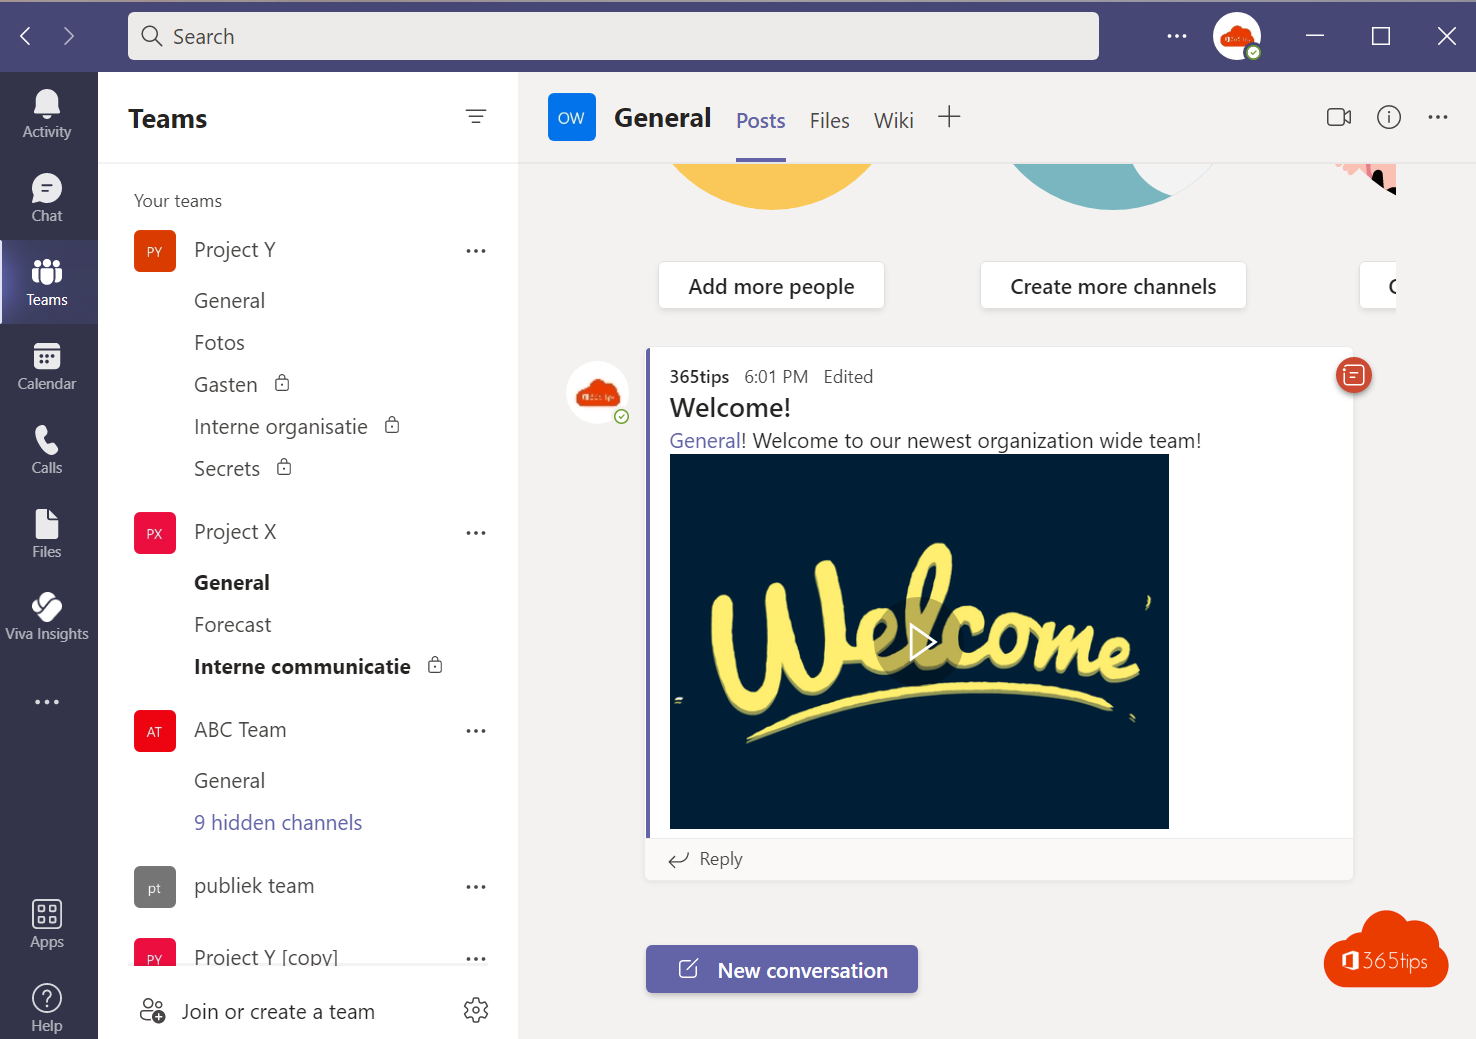 The best Microsoft Teams features: 30 tips to get started in 2022